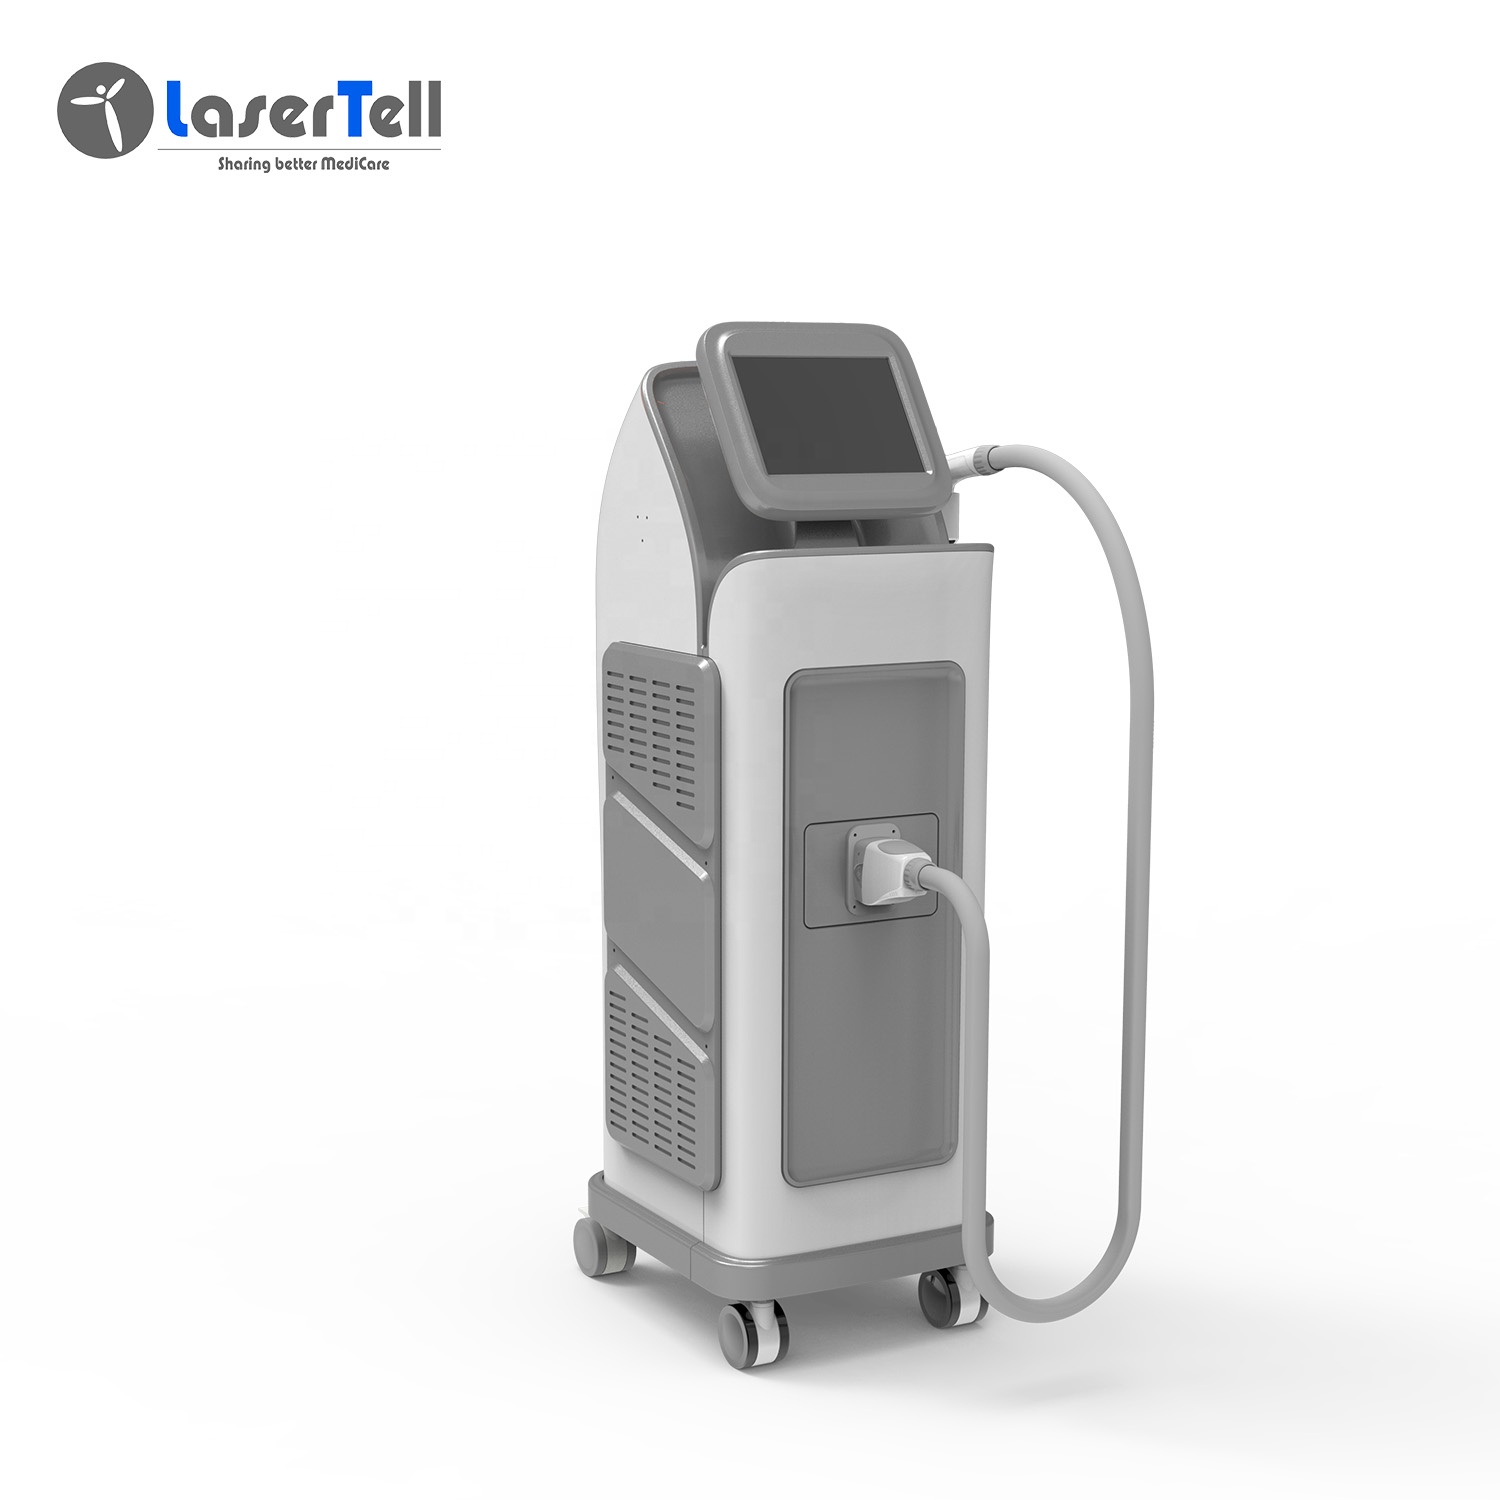 1200w LaserTell Ice Platinum two spot size diode laser hair removal 808nm 755nm 1064nm optional